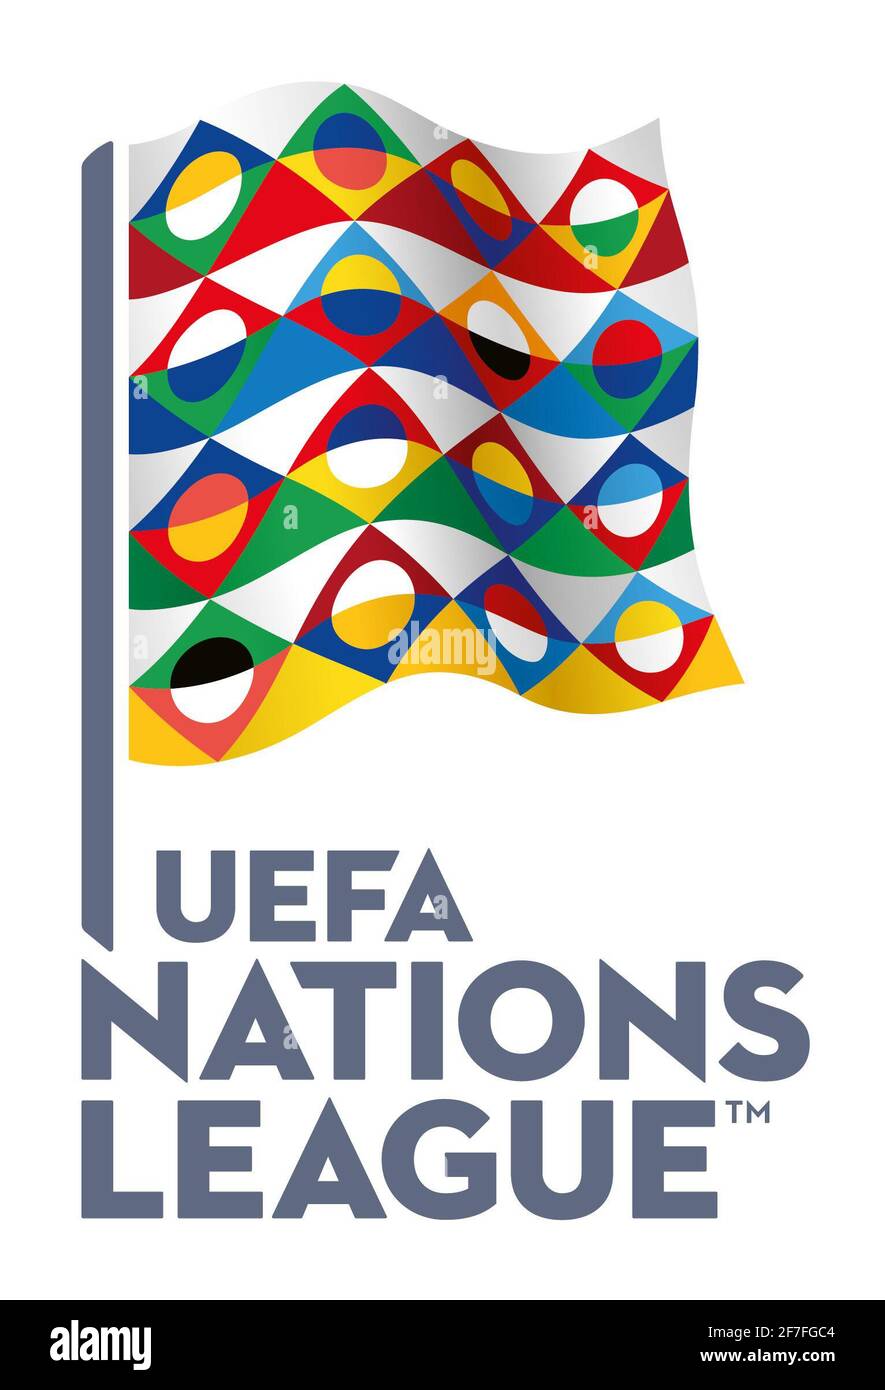 Uefa logo Cut Out Stock Images & Pictures - Alamy